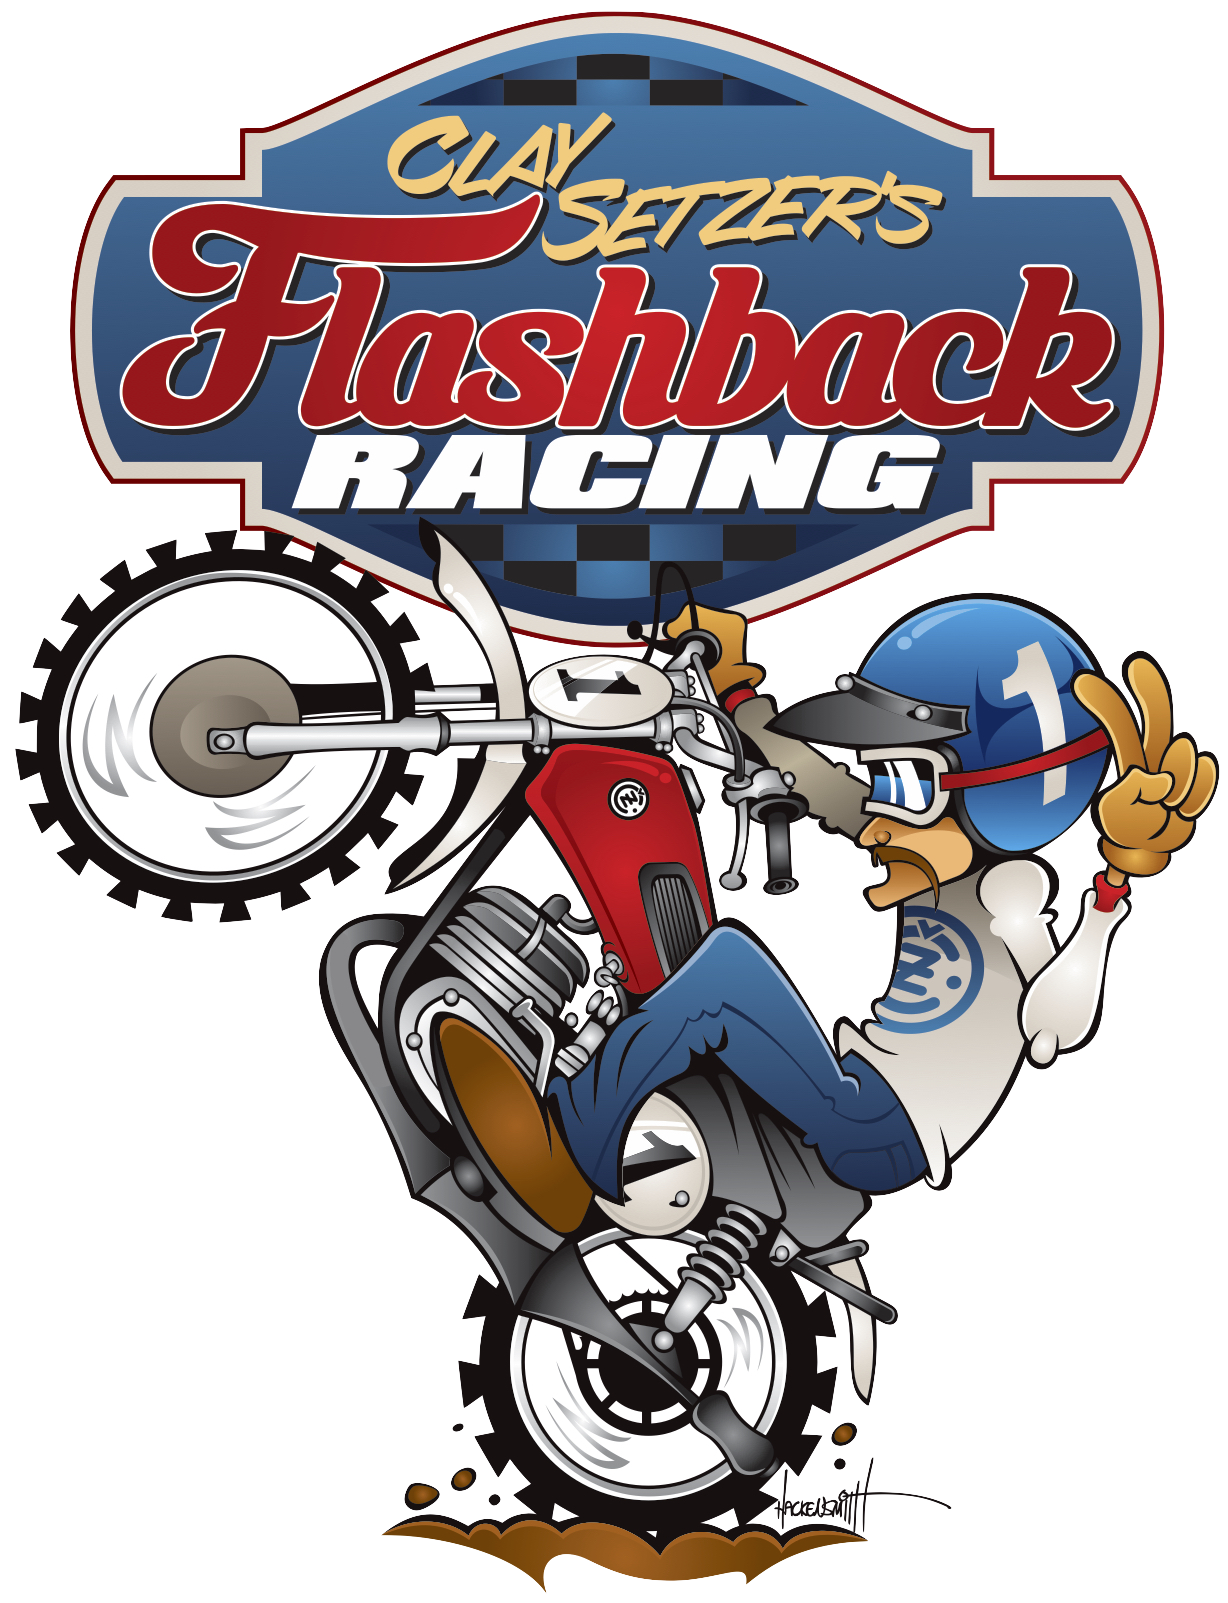 Vintage Motocross Works Bikes And Production Models Welcome To Flashback Racing